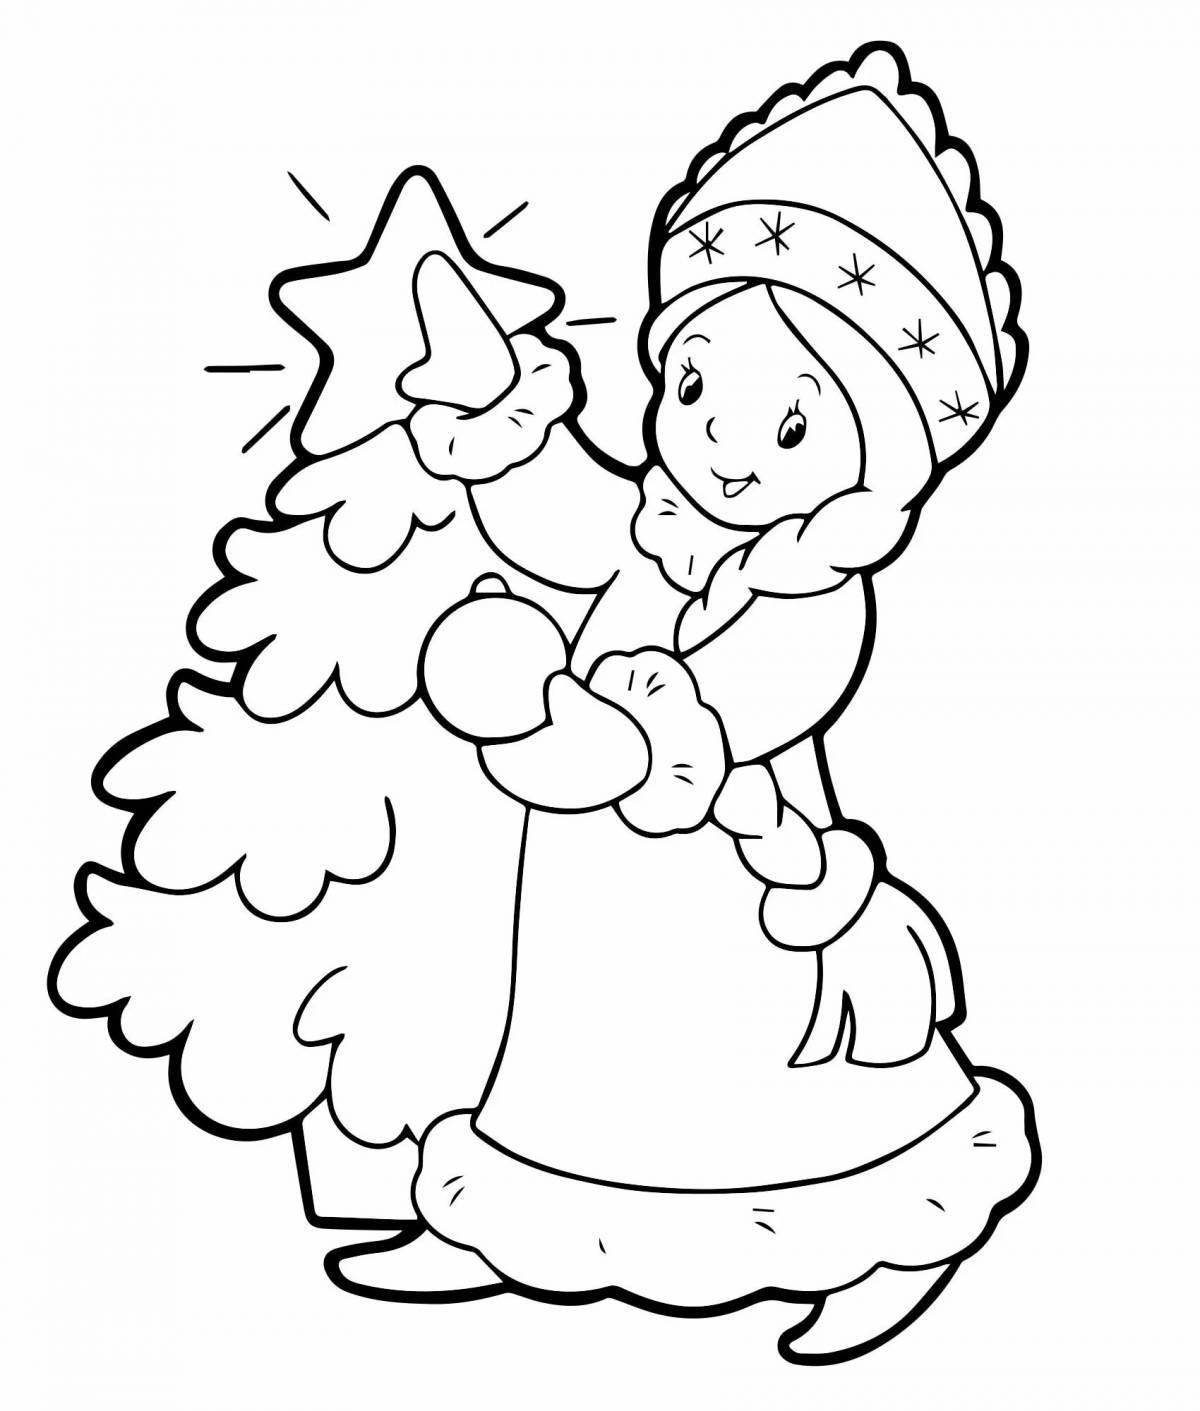 Adorable snow maiden coloring book for kids